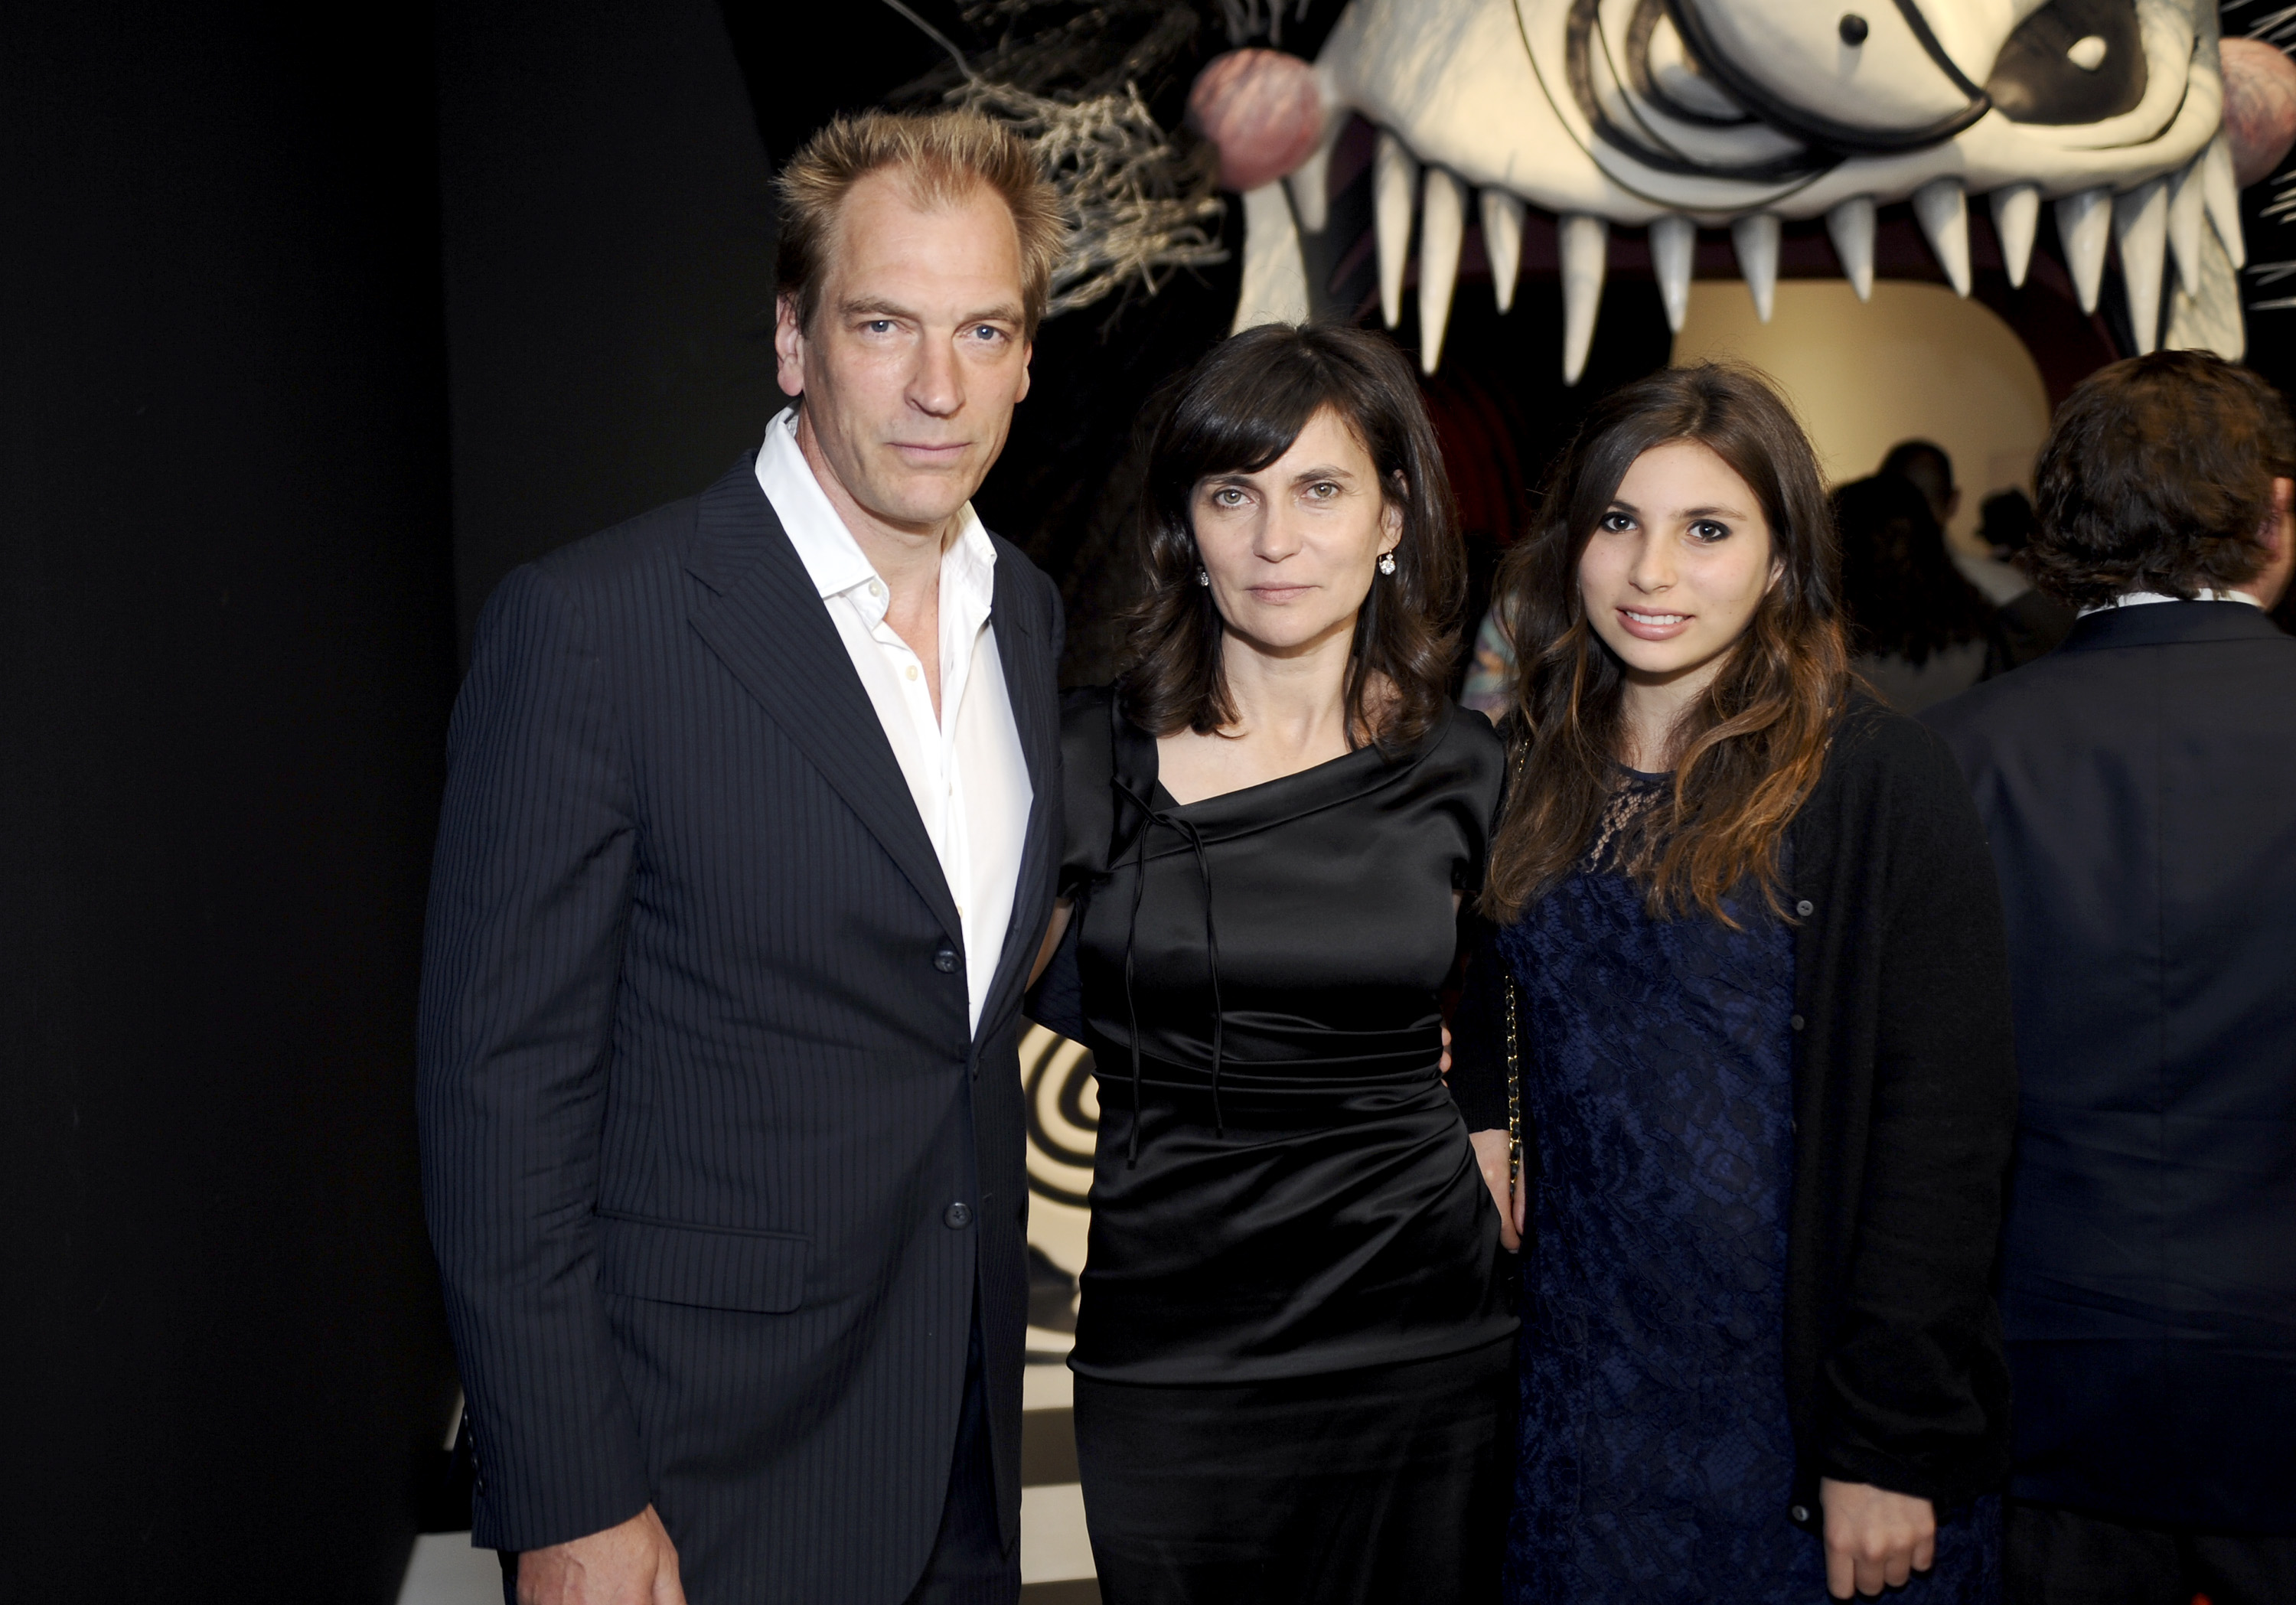 Jullian Sands, Evgenia Citkowitz, and Natalia Sands are pictured at the Opening Party For Tim Burton At LACMA on May 28, 2011, in Los Angeles, California | Source: Getty Images